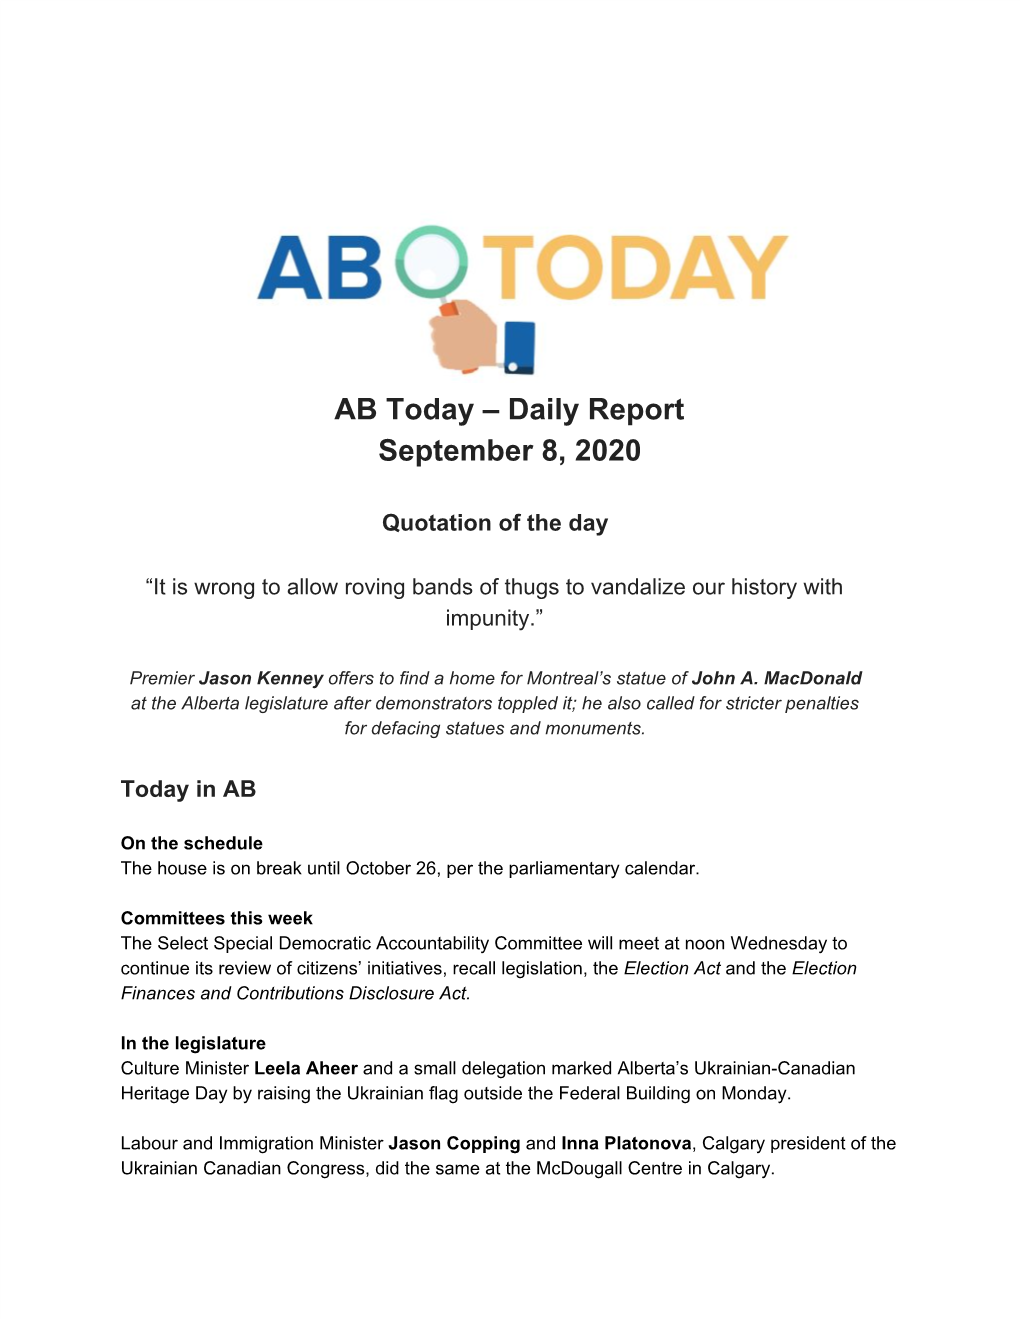 AB Today – Daily Report September 8, 2020